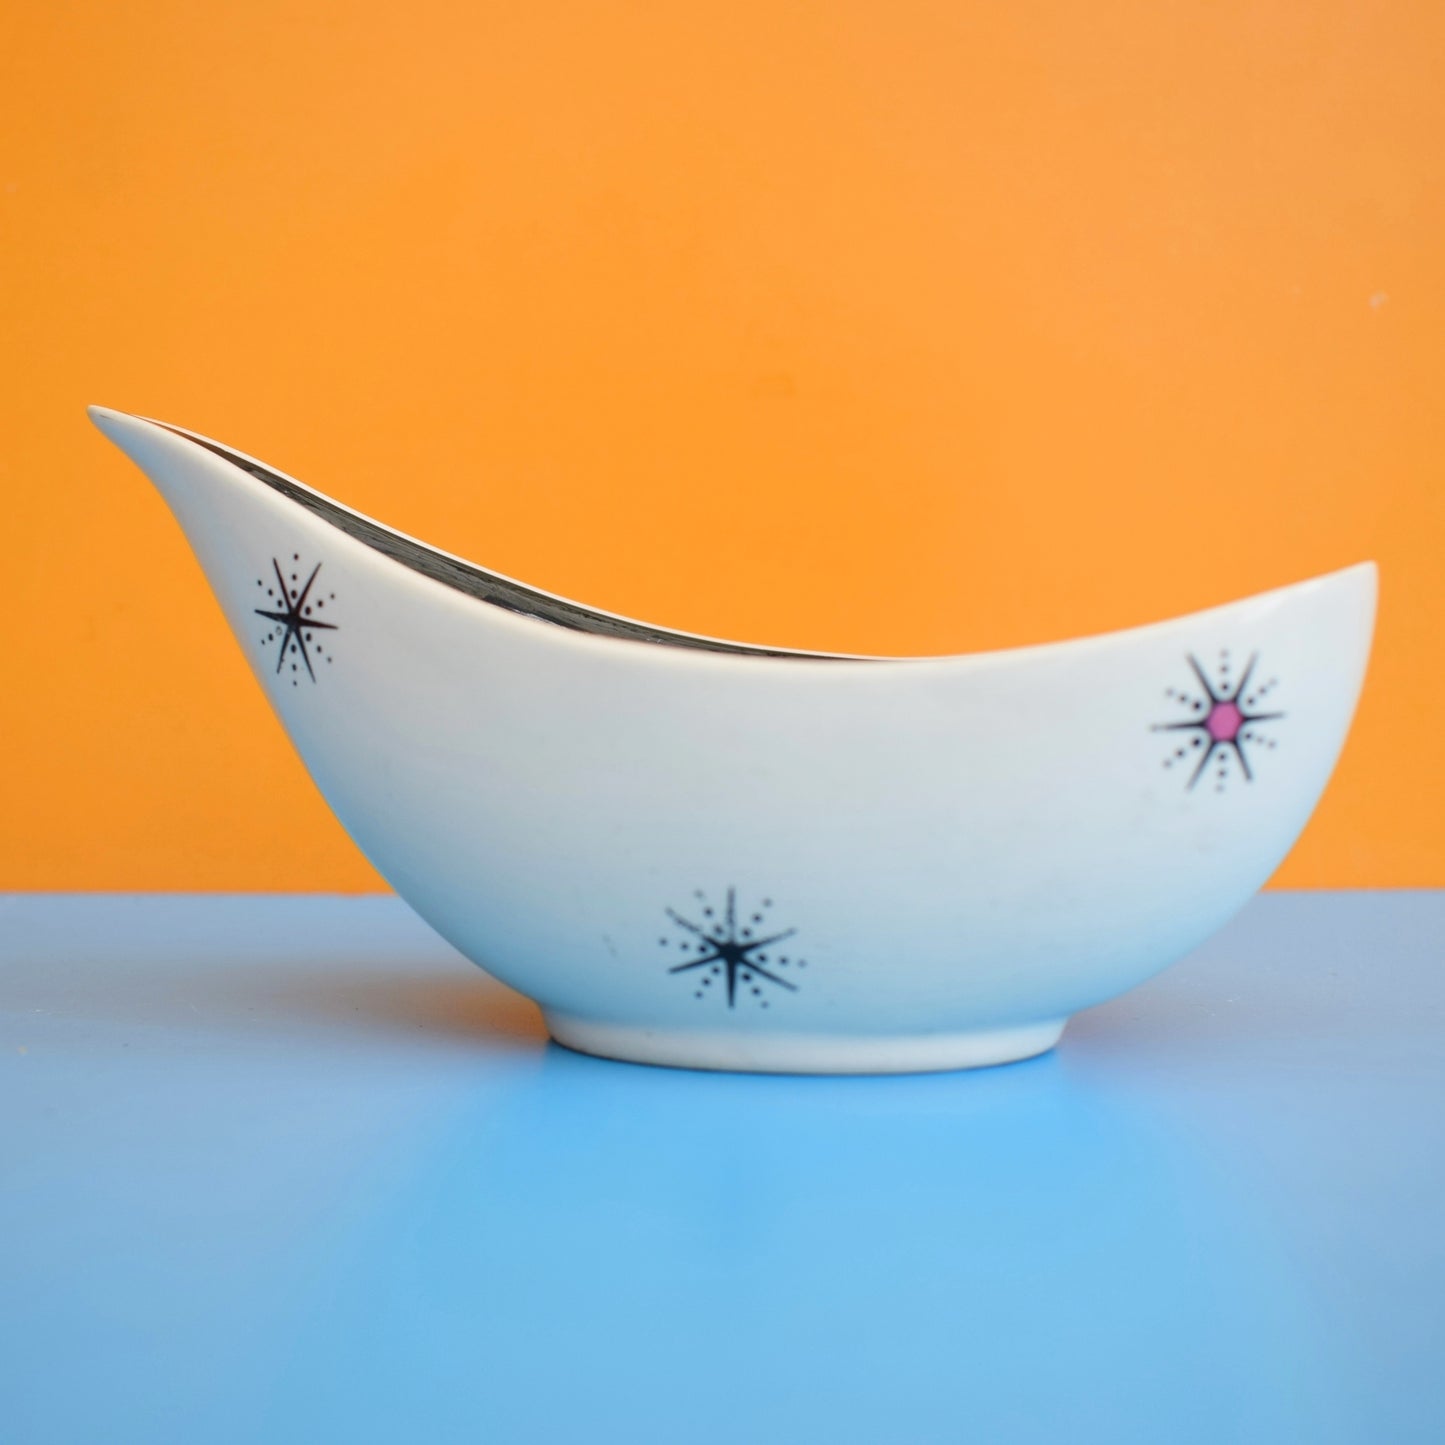 Vintage 1950s Wade China - Shooting Star Bowl / Spoon Rest